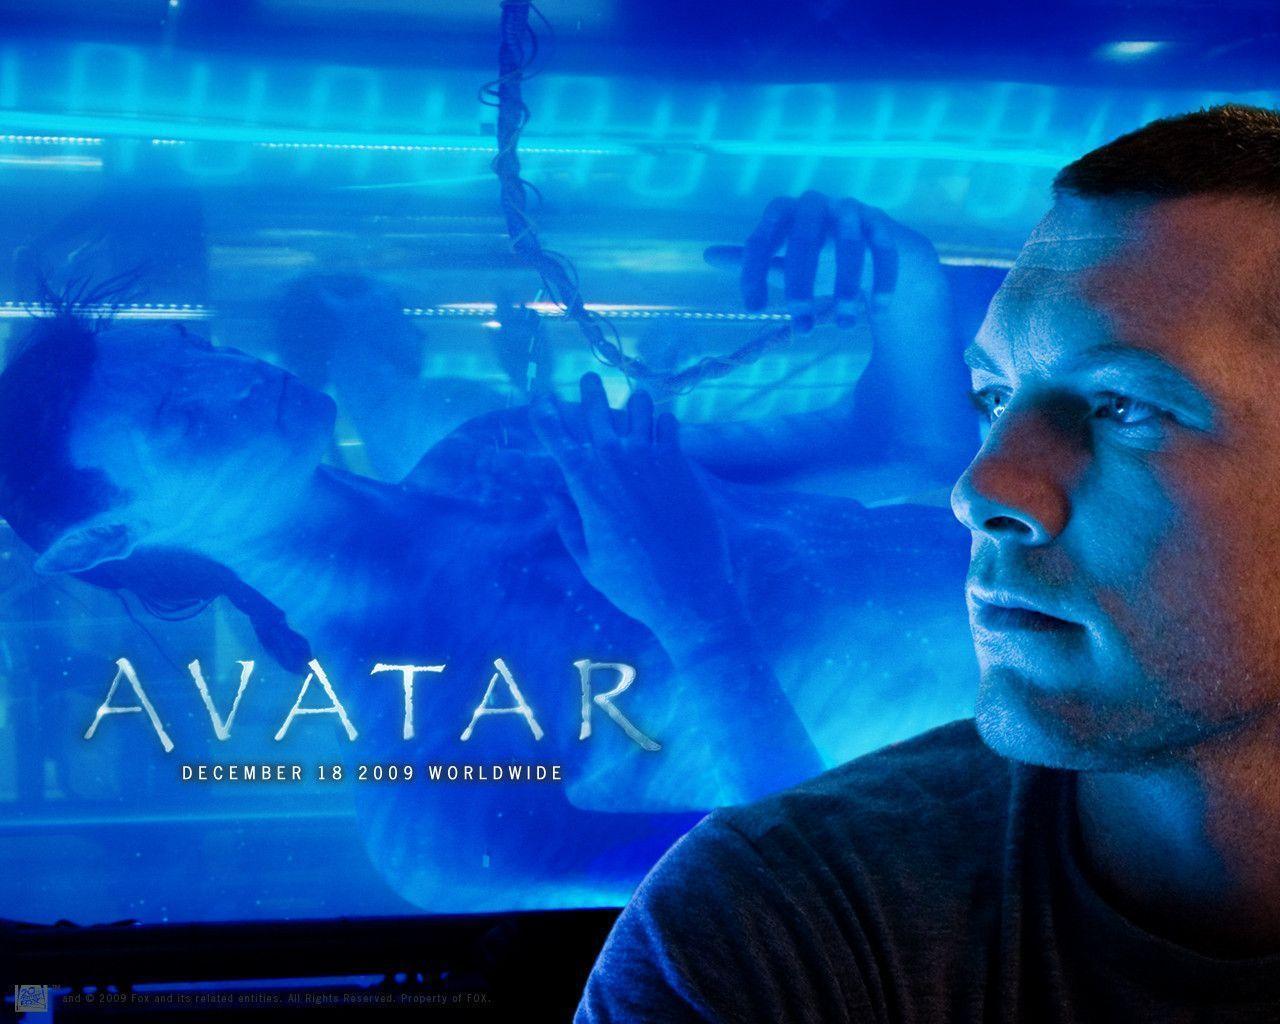 James Cameron&Avatar Wallpapers Number